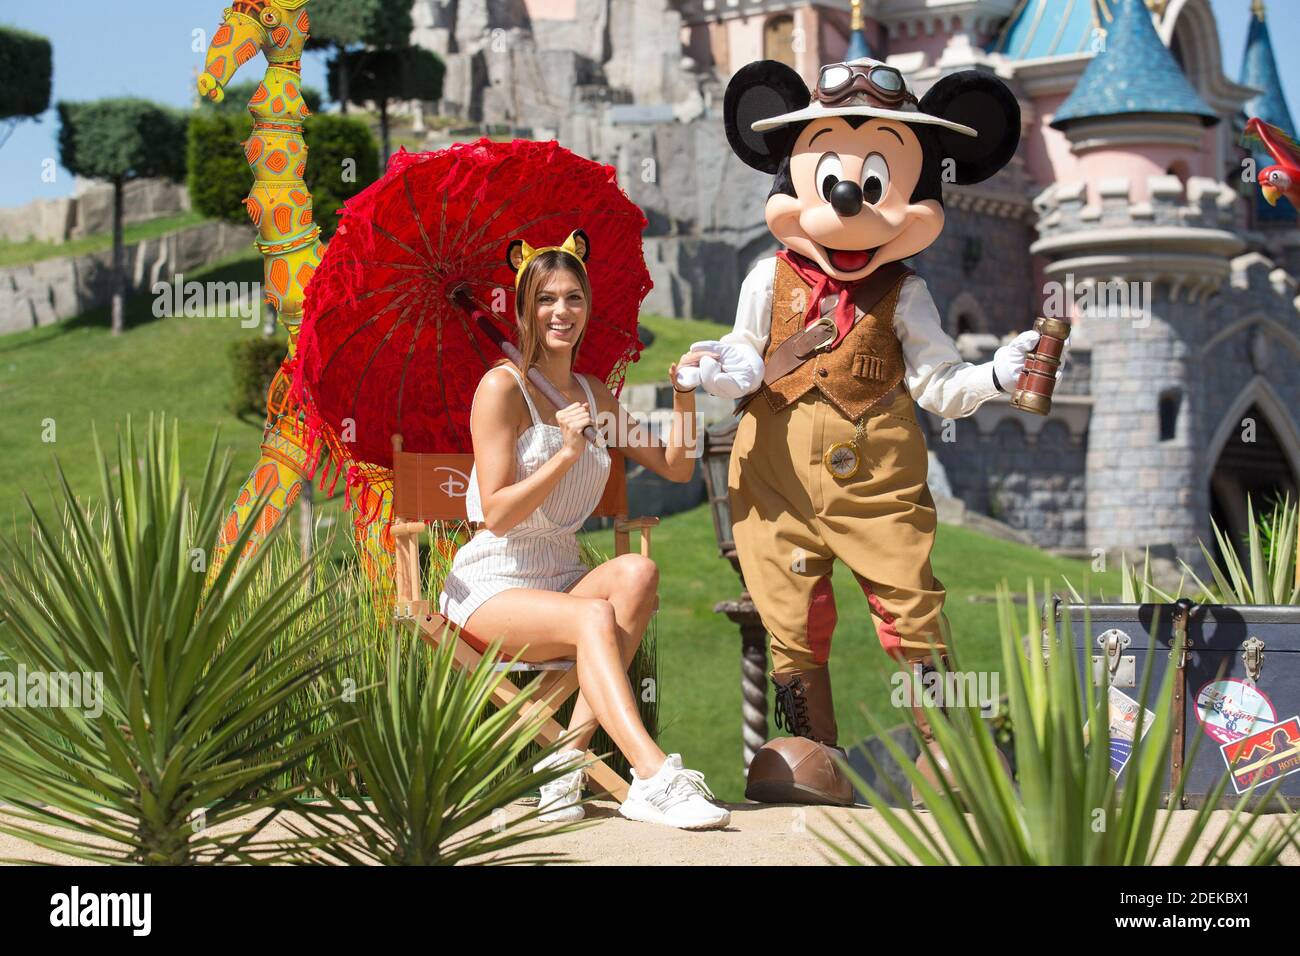 Iris Mittenaere Miss Univers 2018 Attends Jungle Book Jive Photocall During The Lion King 